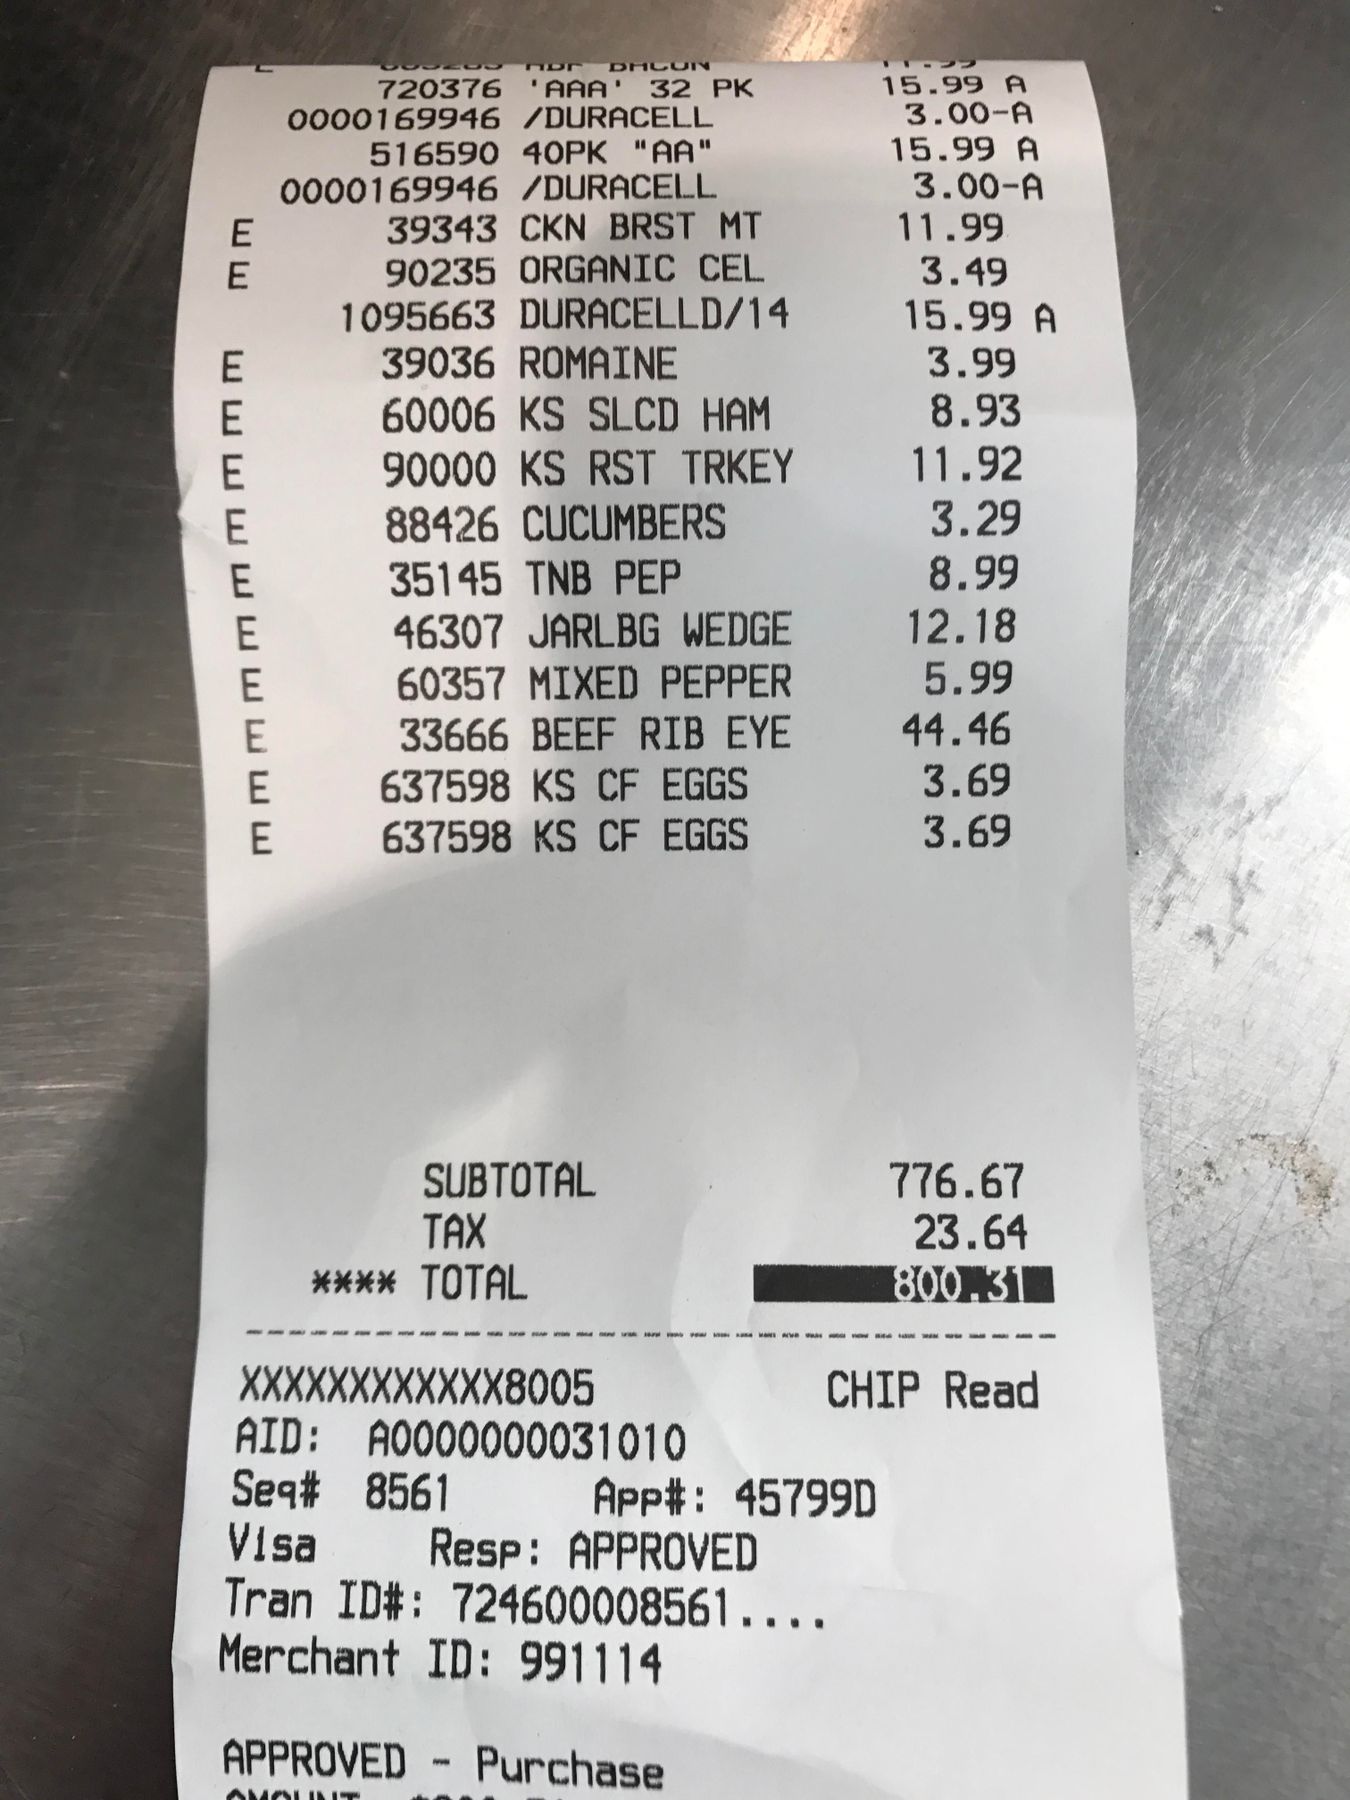 There's Actually A Reason Costco Checks Your Receipt, And It's Not To